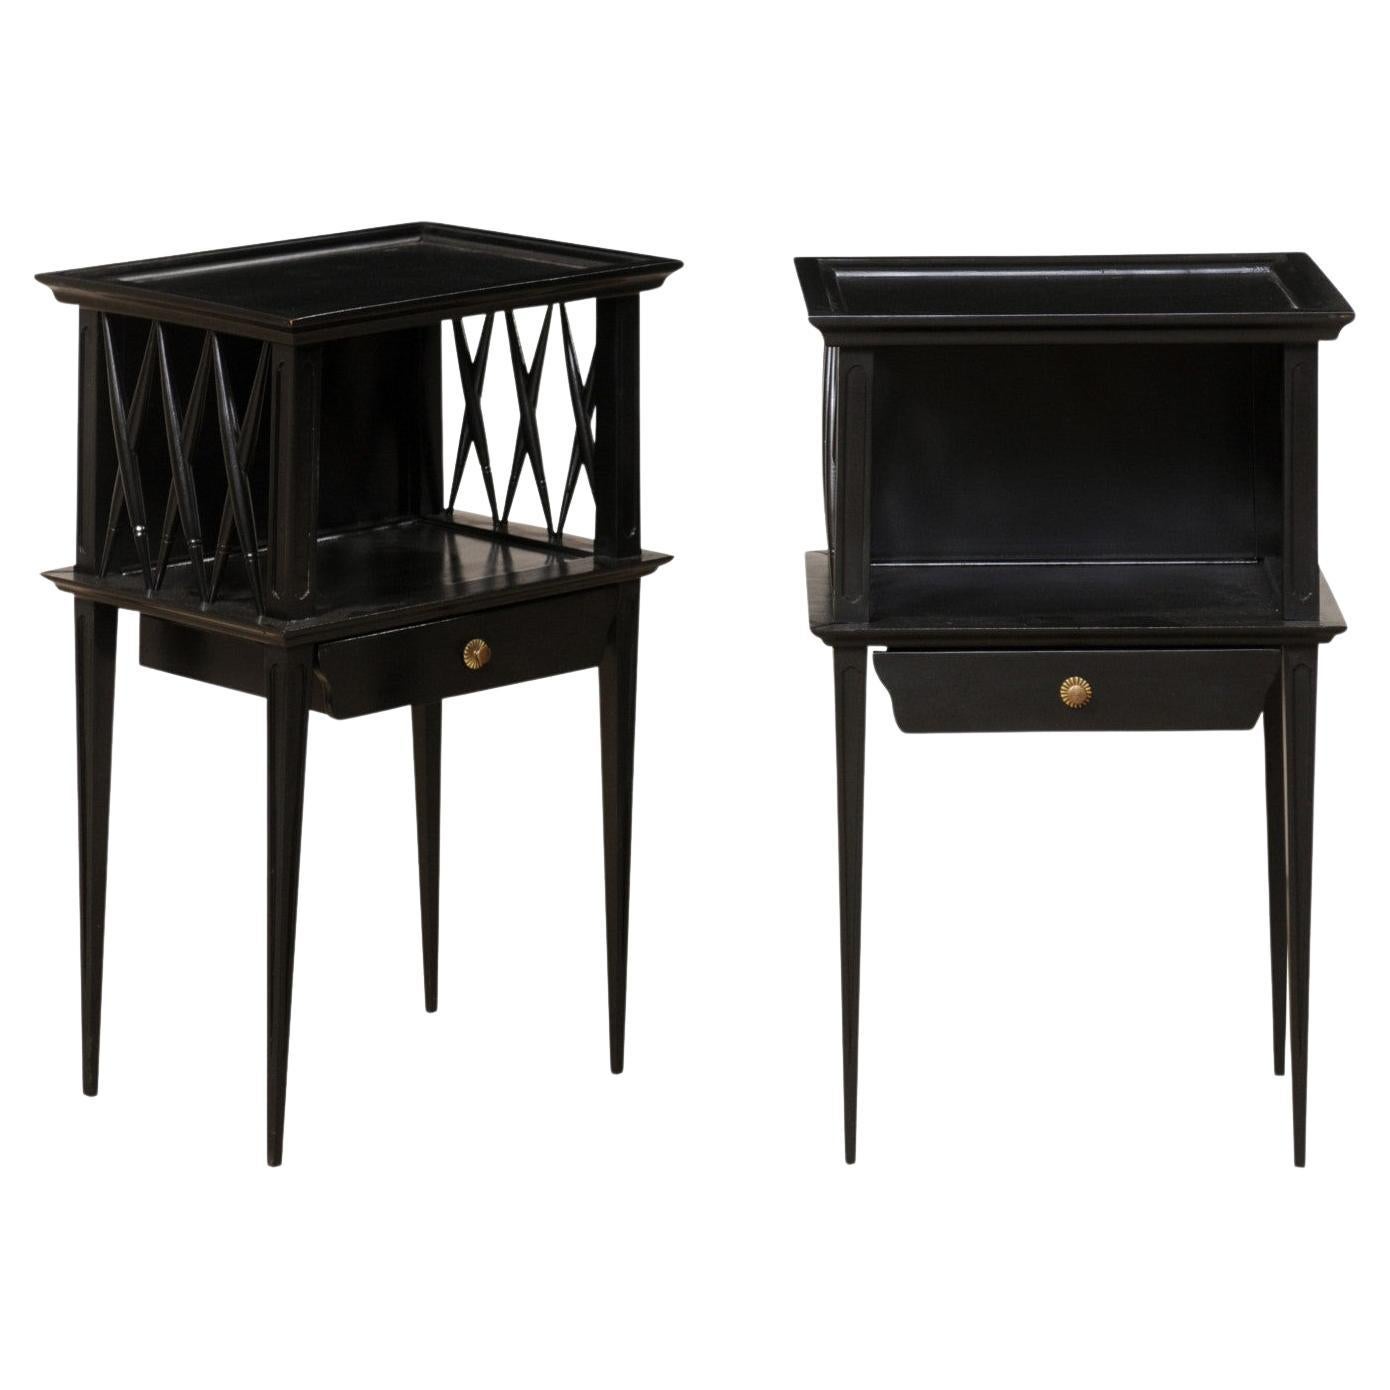 A French Pair of Wooden Side Chests/End Tables in Black, Mid 20th Century